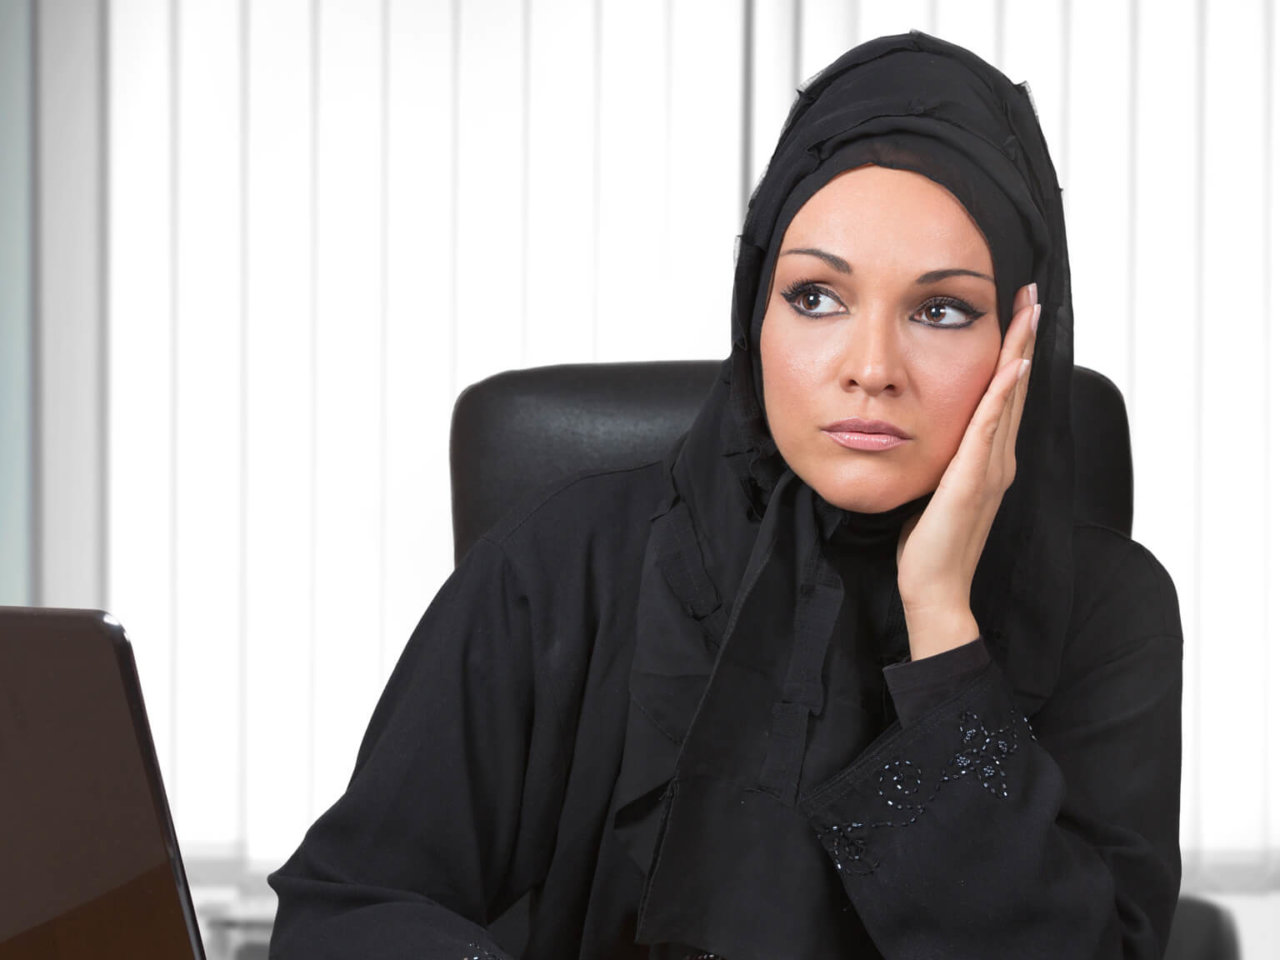 Business woman in head scarf thinking in front of computer